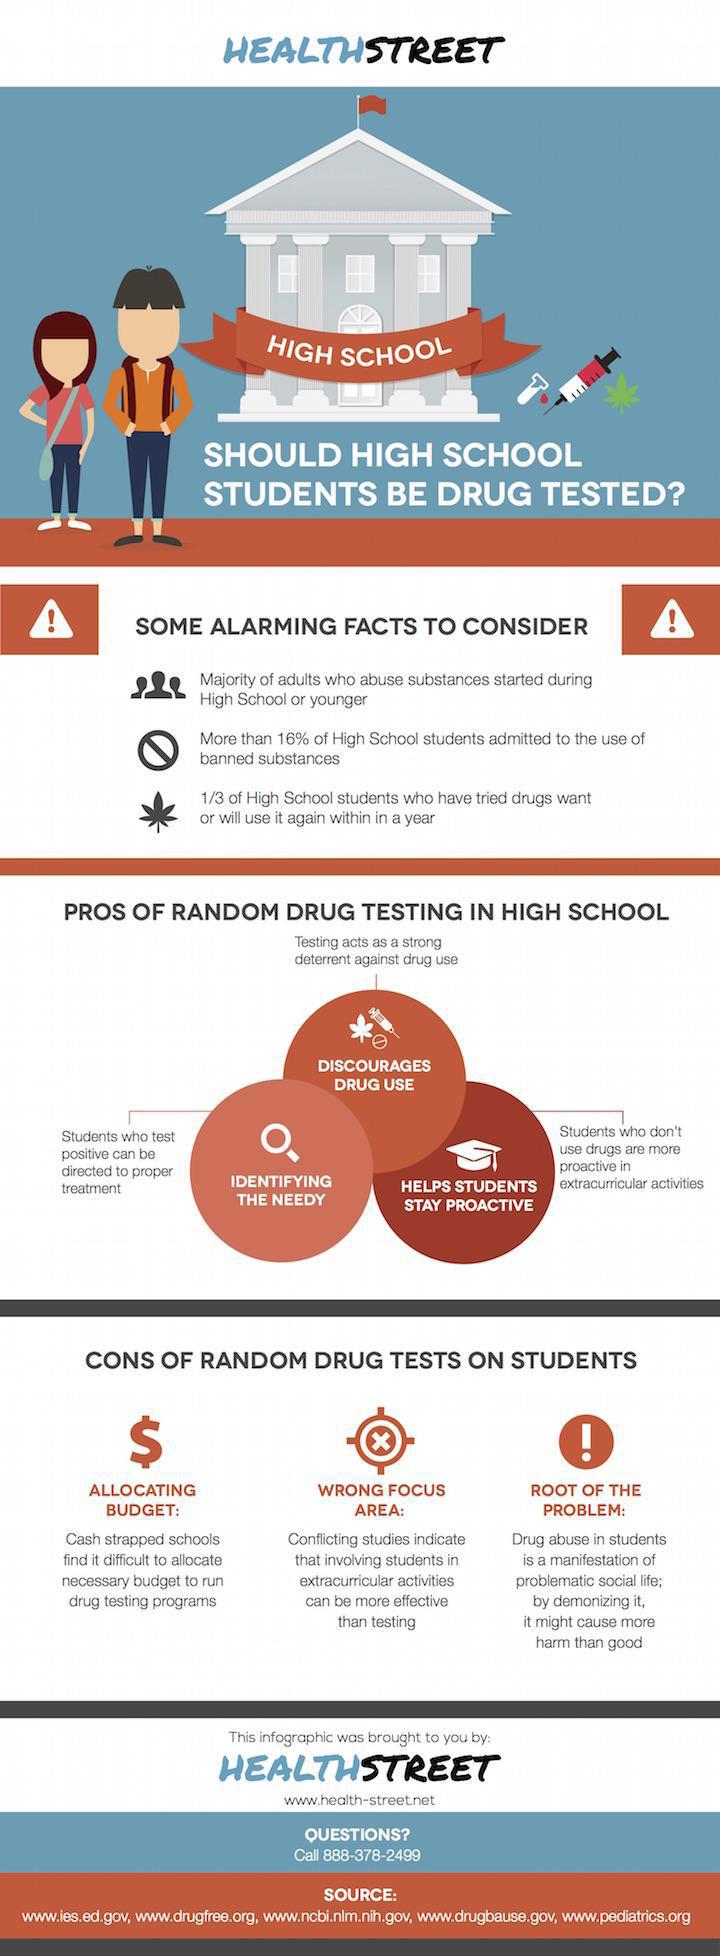 Should High School Students be Drug Tested? - infographic